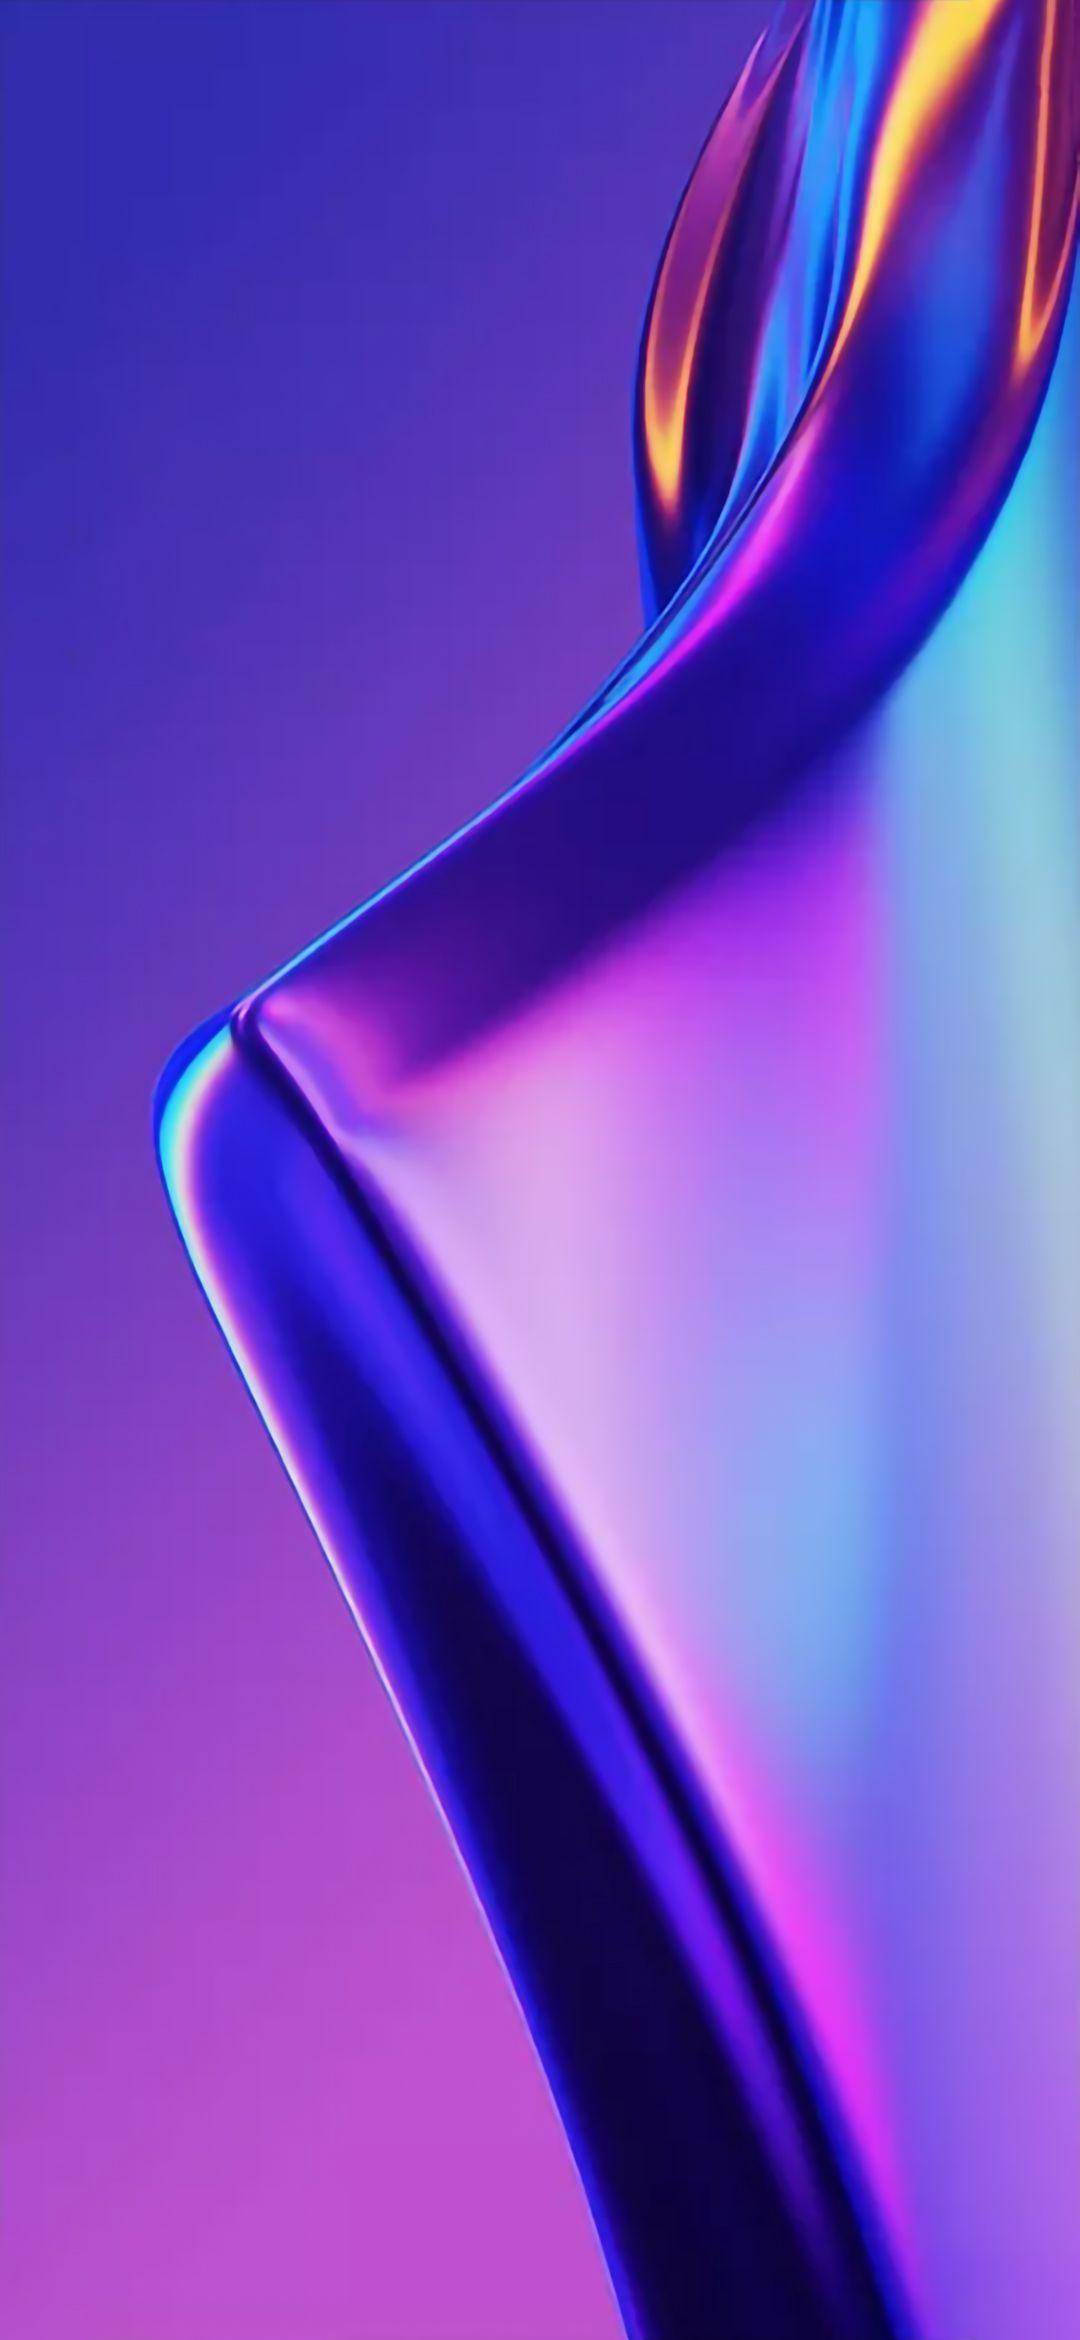 Lock theme for sparkle night oppo a37 wallpaper APK voor Android Download